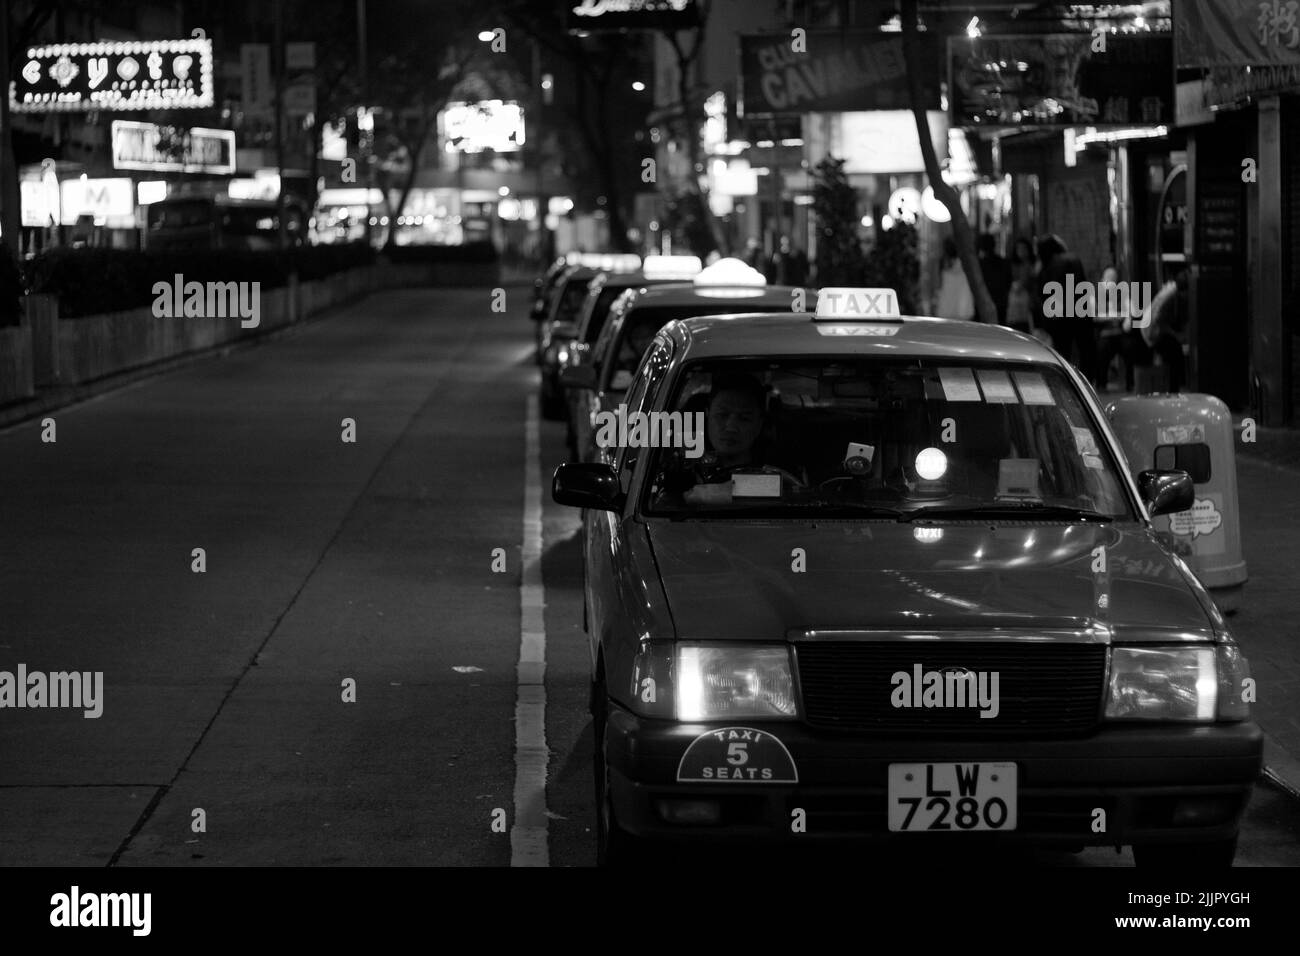 A beautiful shot of a taxi rank in Hong Kong in grayscale Stock Photo